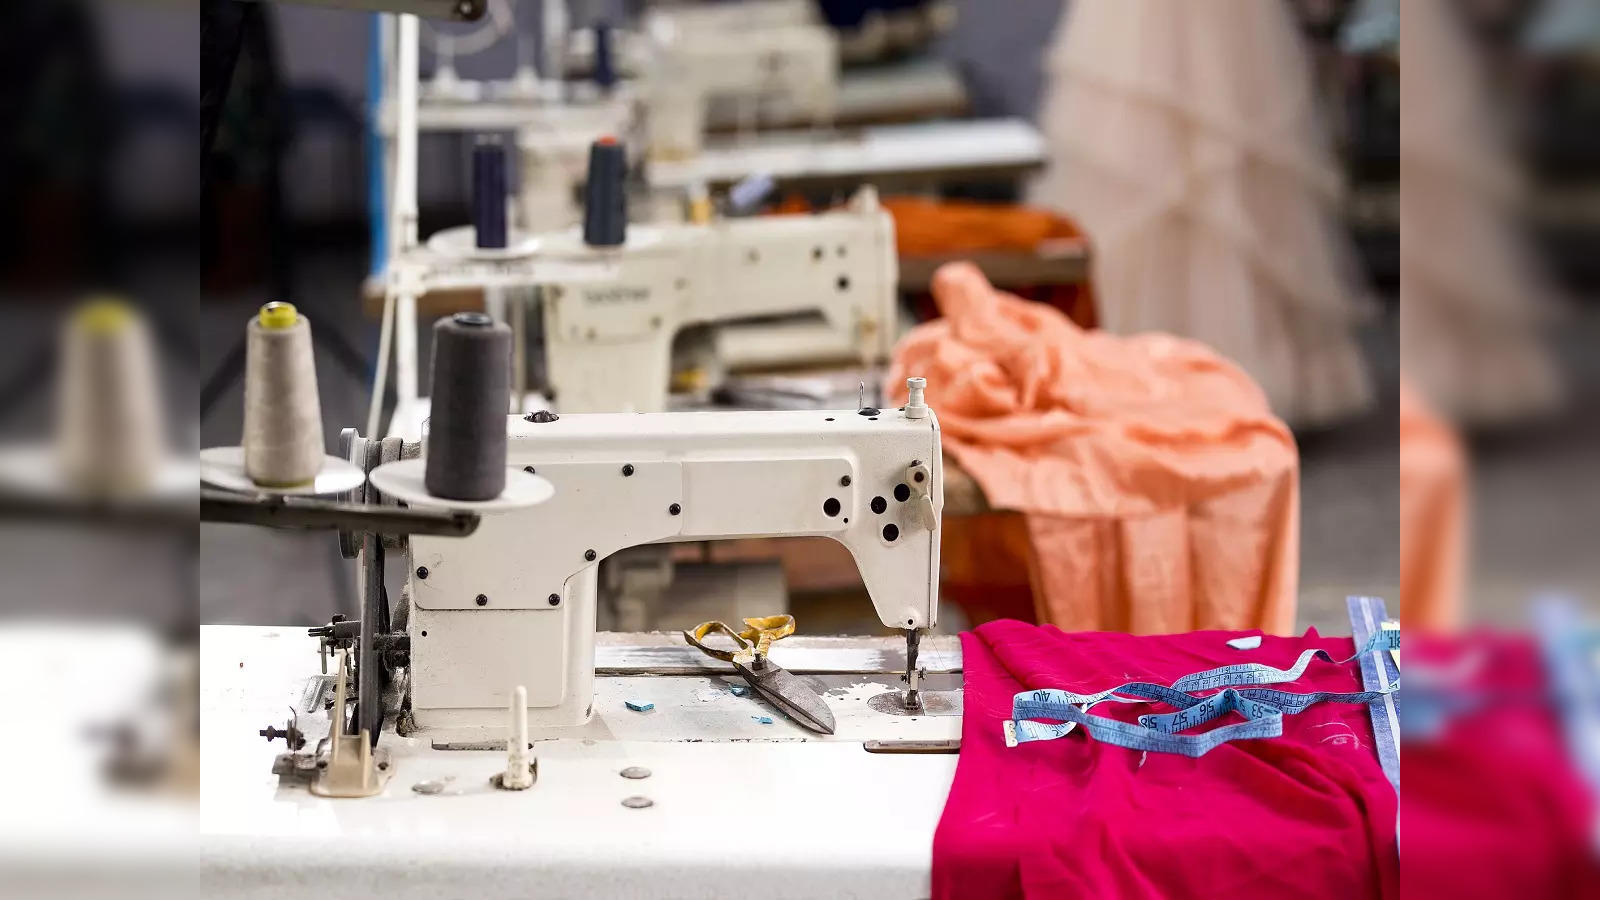 How to start the Readymade garments manufacturing unit?